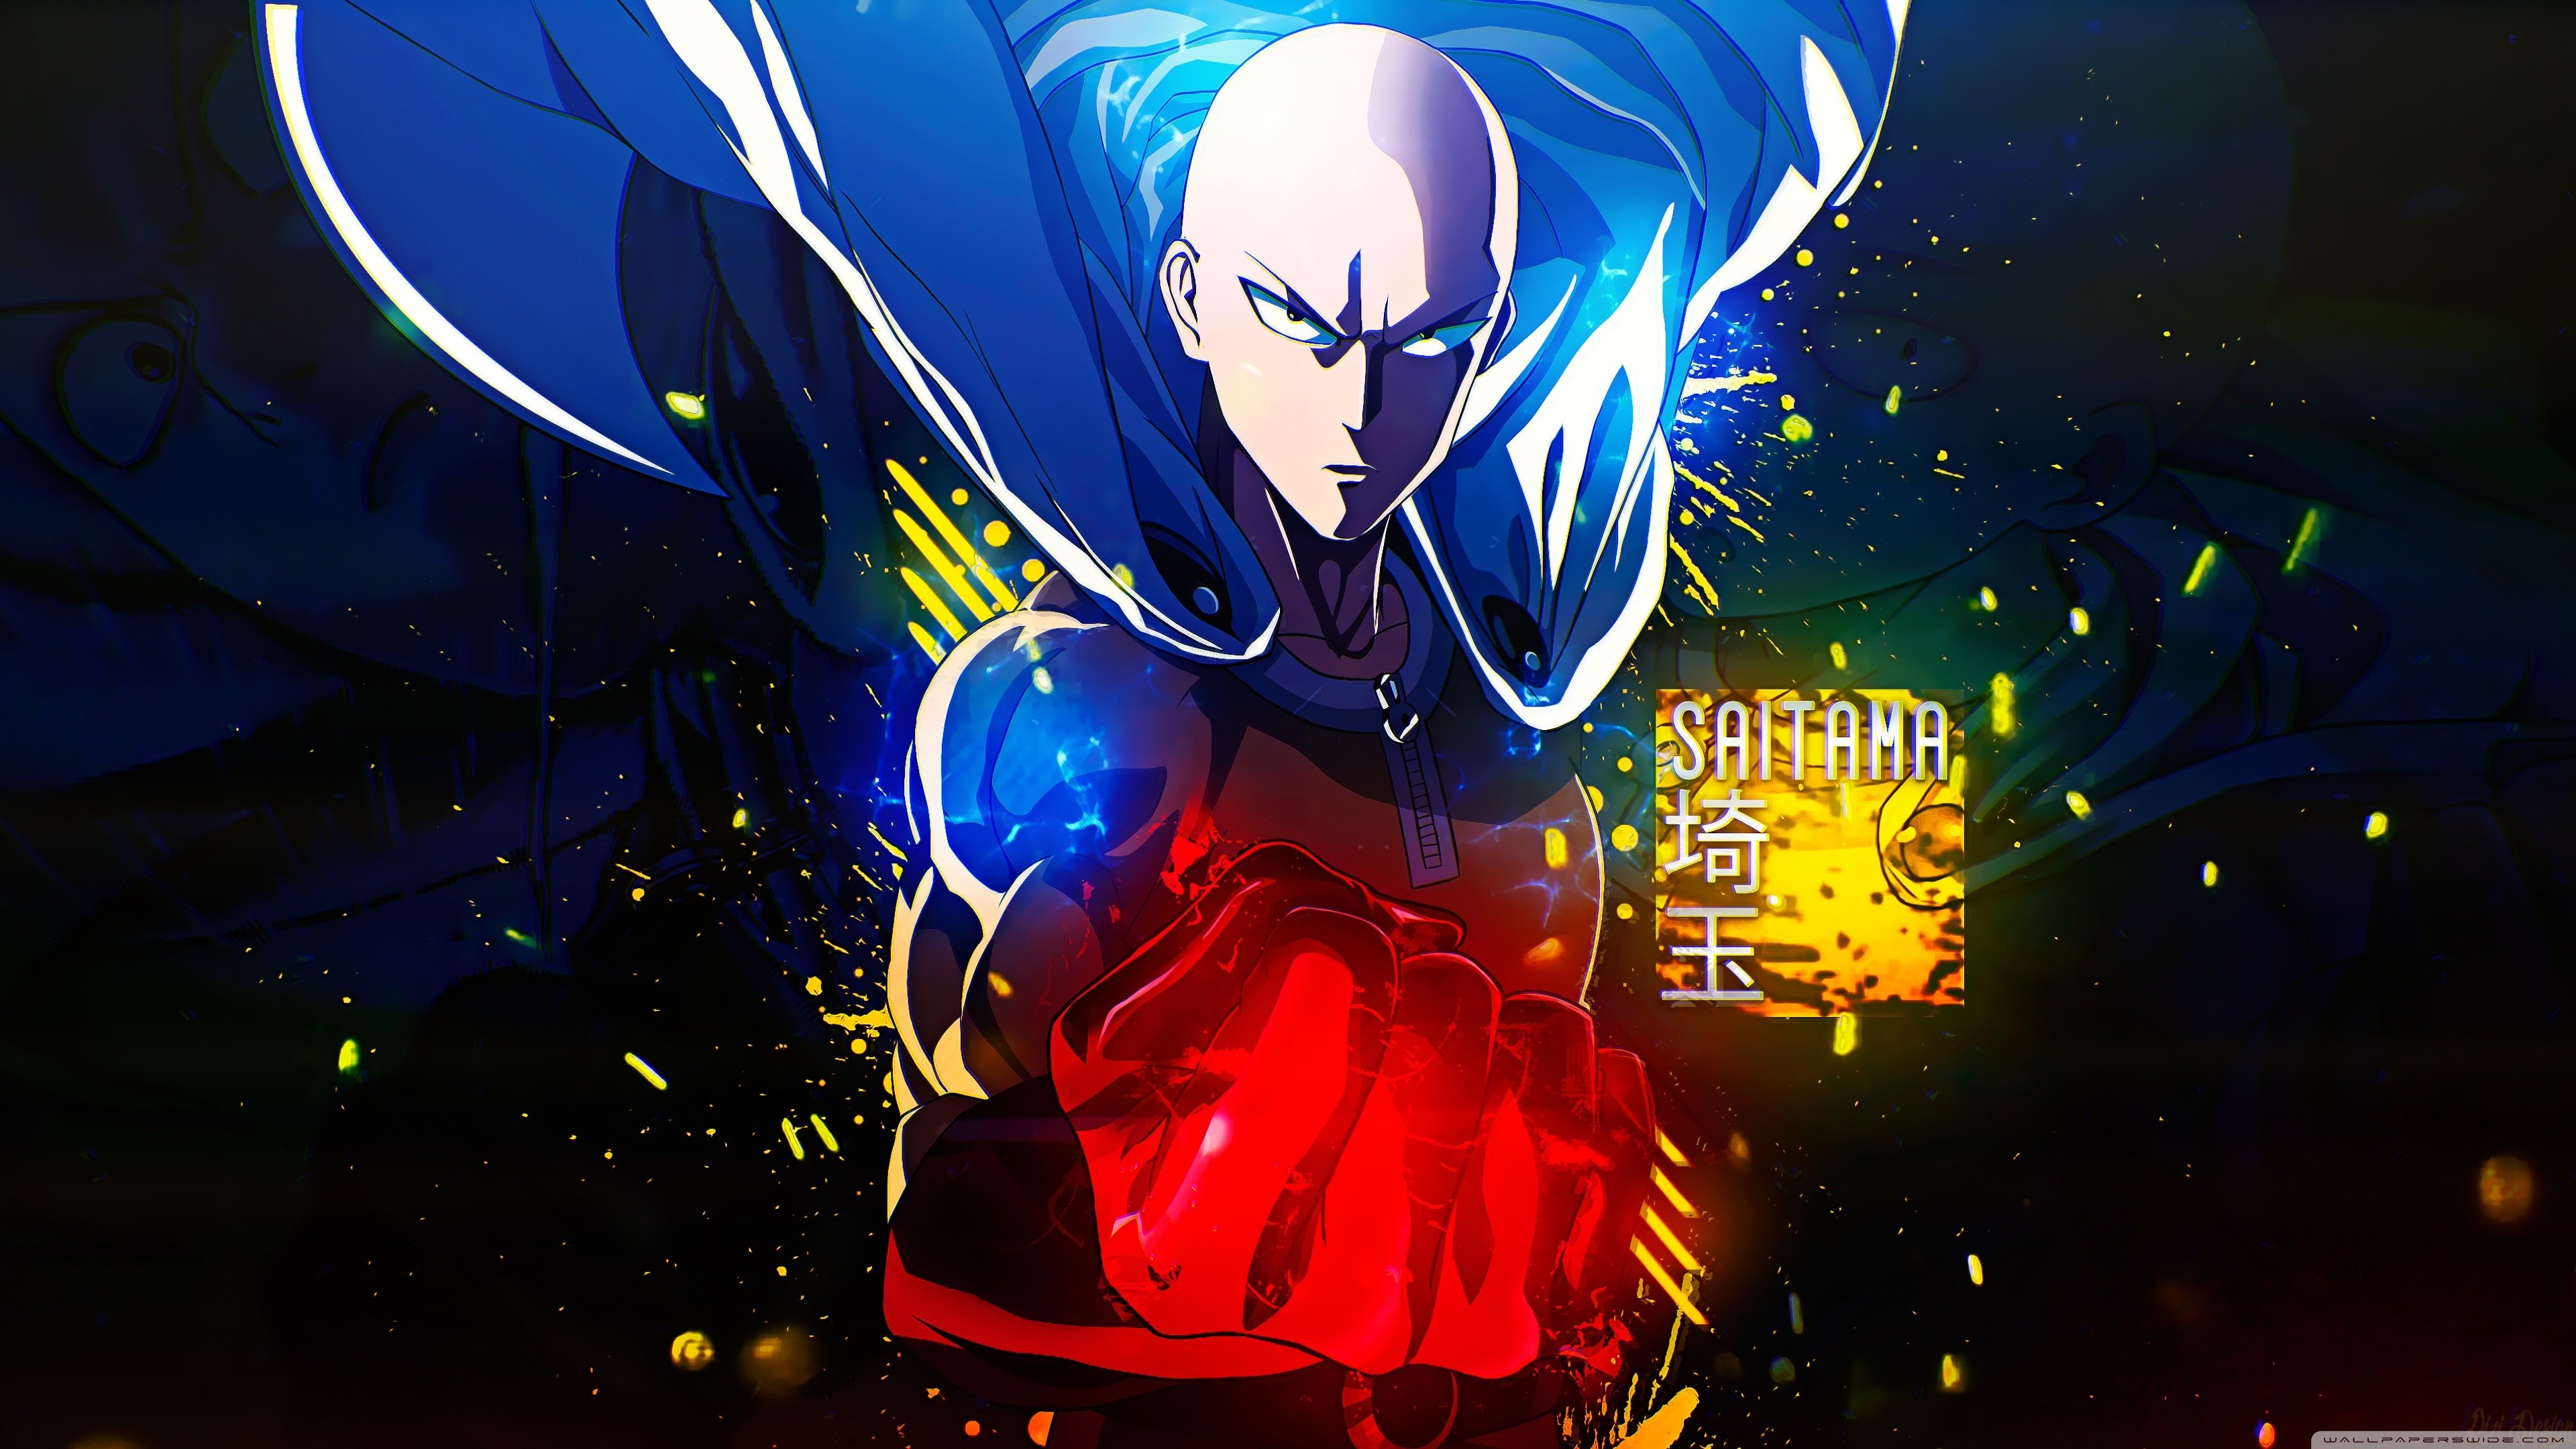 One Punch Man Anime 1366X768 Wallpapers 1366x768 one punch man anime 4k
1366x768 resolution hd 4k wallpapers